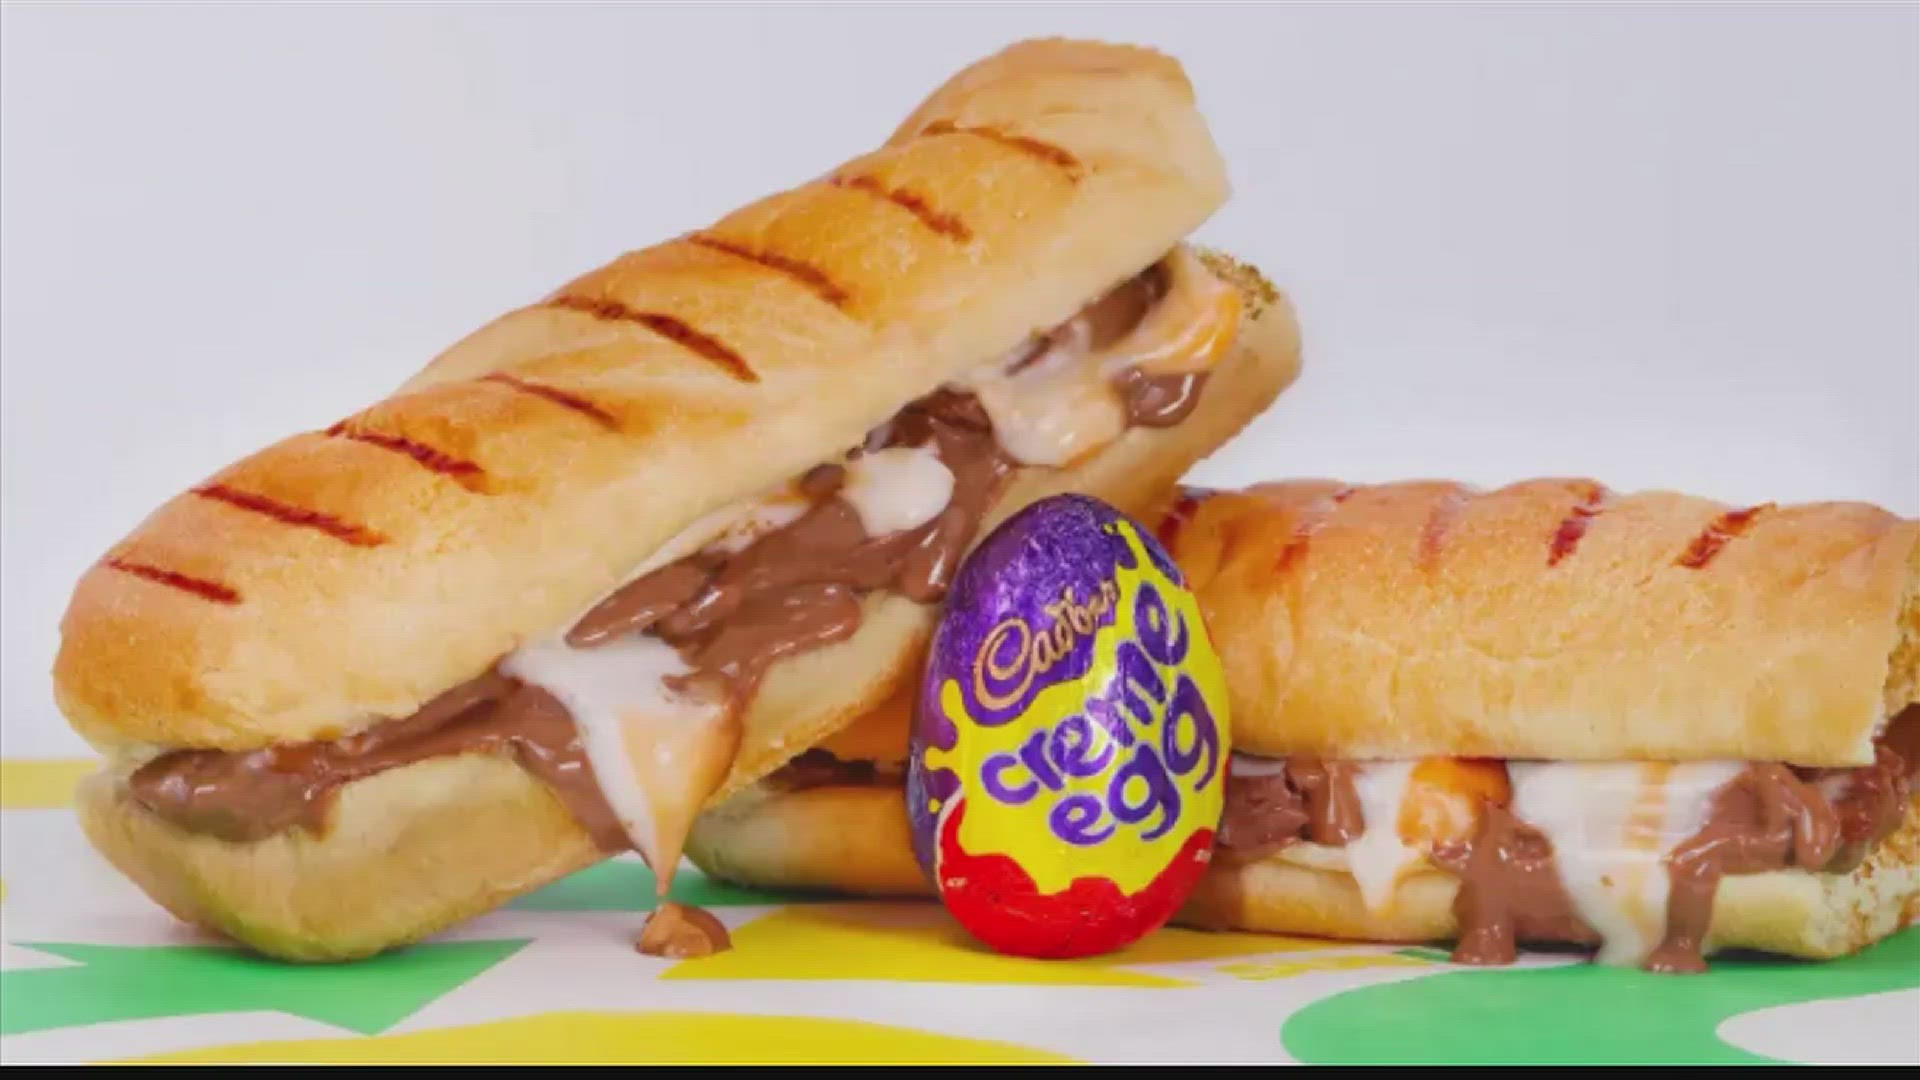 In short - melted Creme Egg sandwiches. What does our team have to say about that?